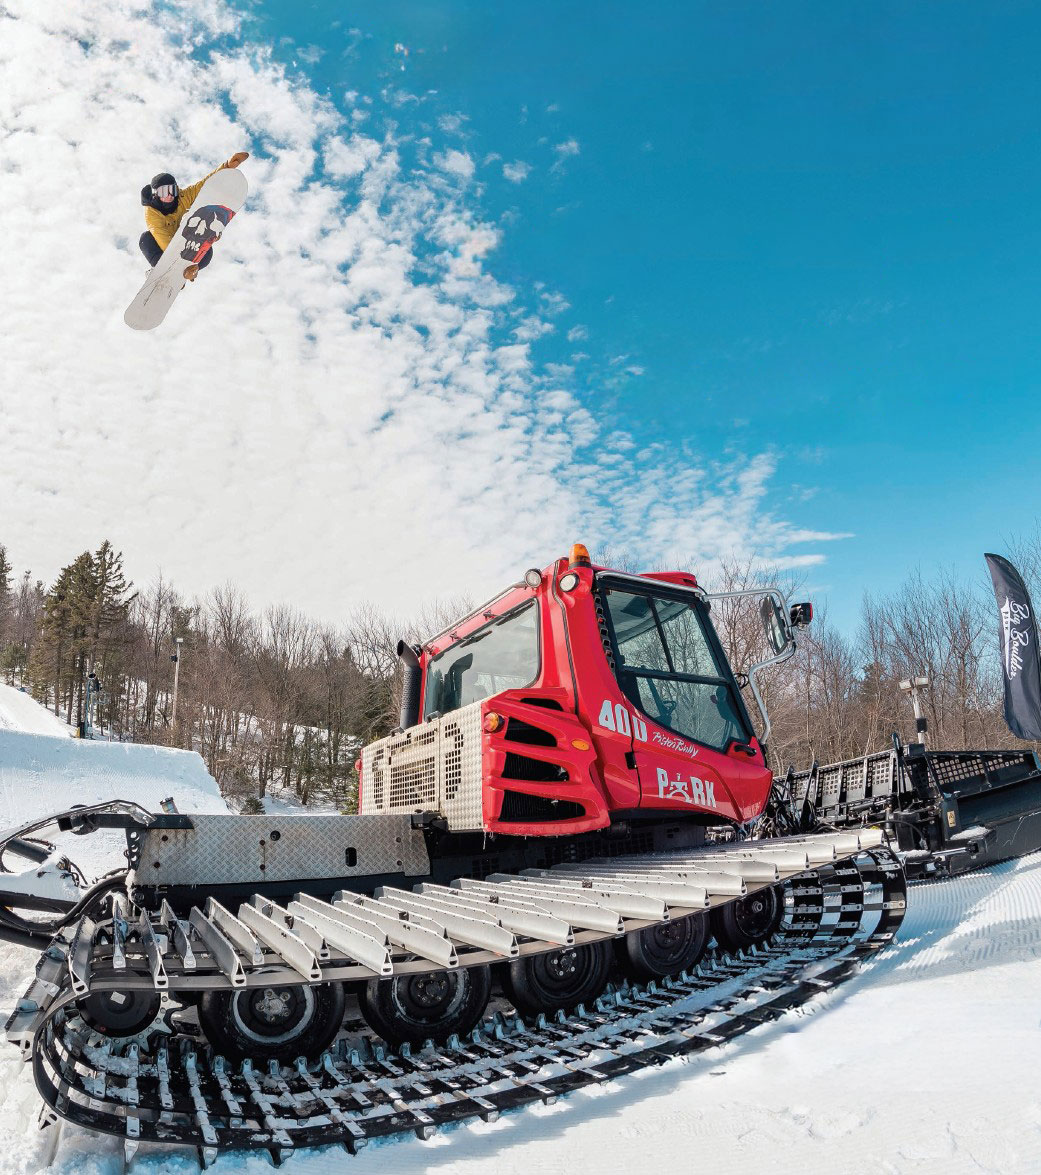 Snowboarder jumping over snow grooming machine